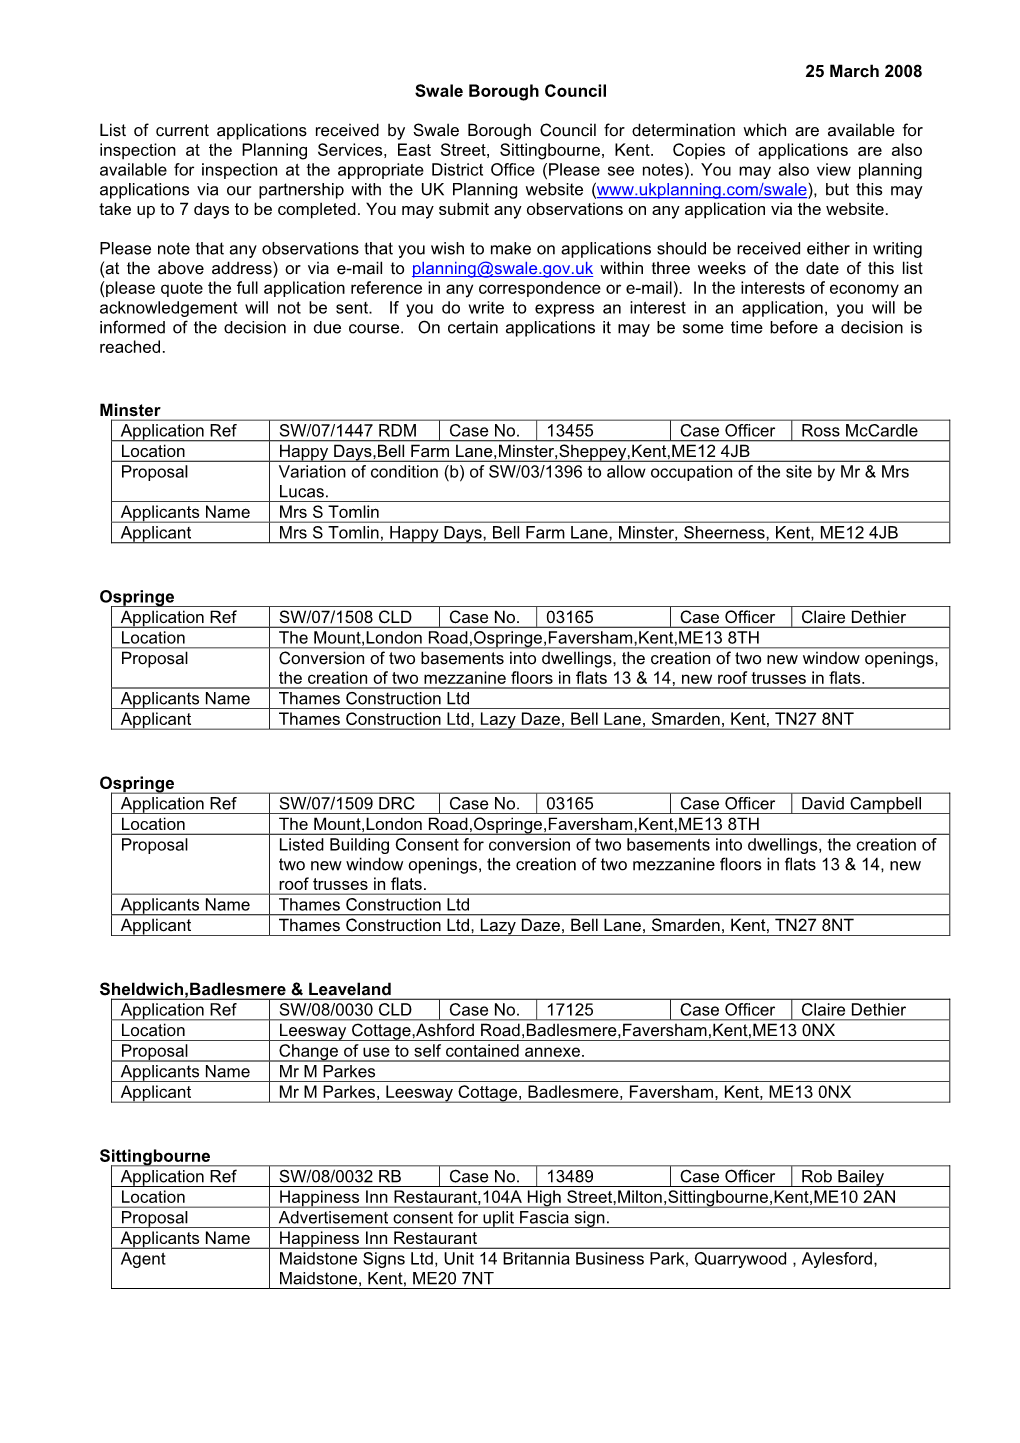 25 March 2008 Swale Borough Council List of Current Applications